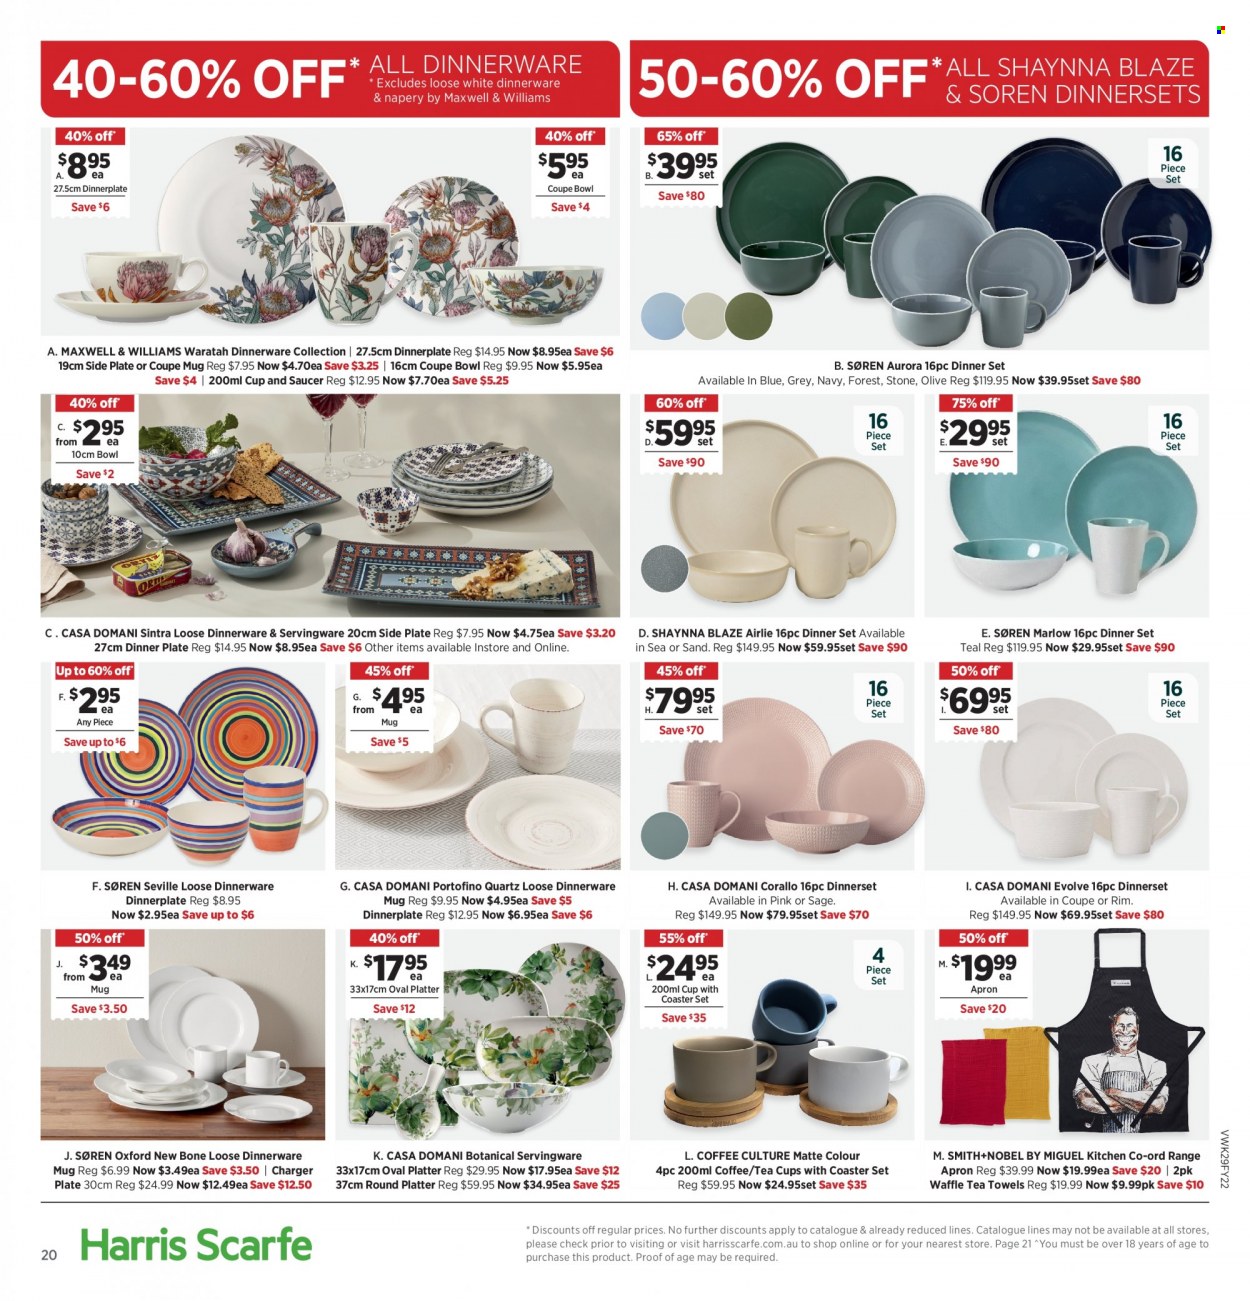 thumbnail - Harris Scarfe Catalogue - Sales products - dinnerware set, mug, plate, saucer, cup, dinner plate, bowl, Smith+Nobel, tea towels, towel. Page 20.